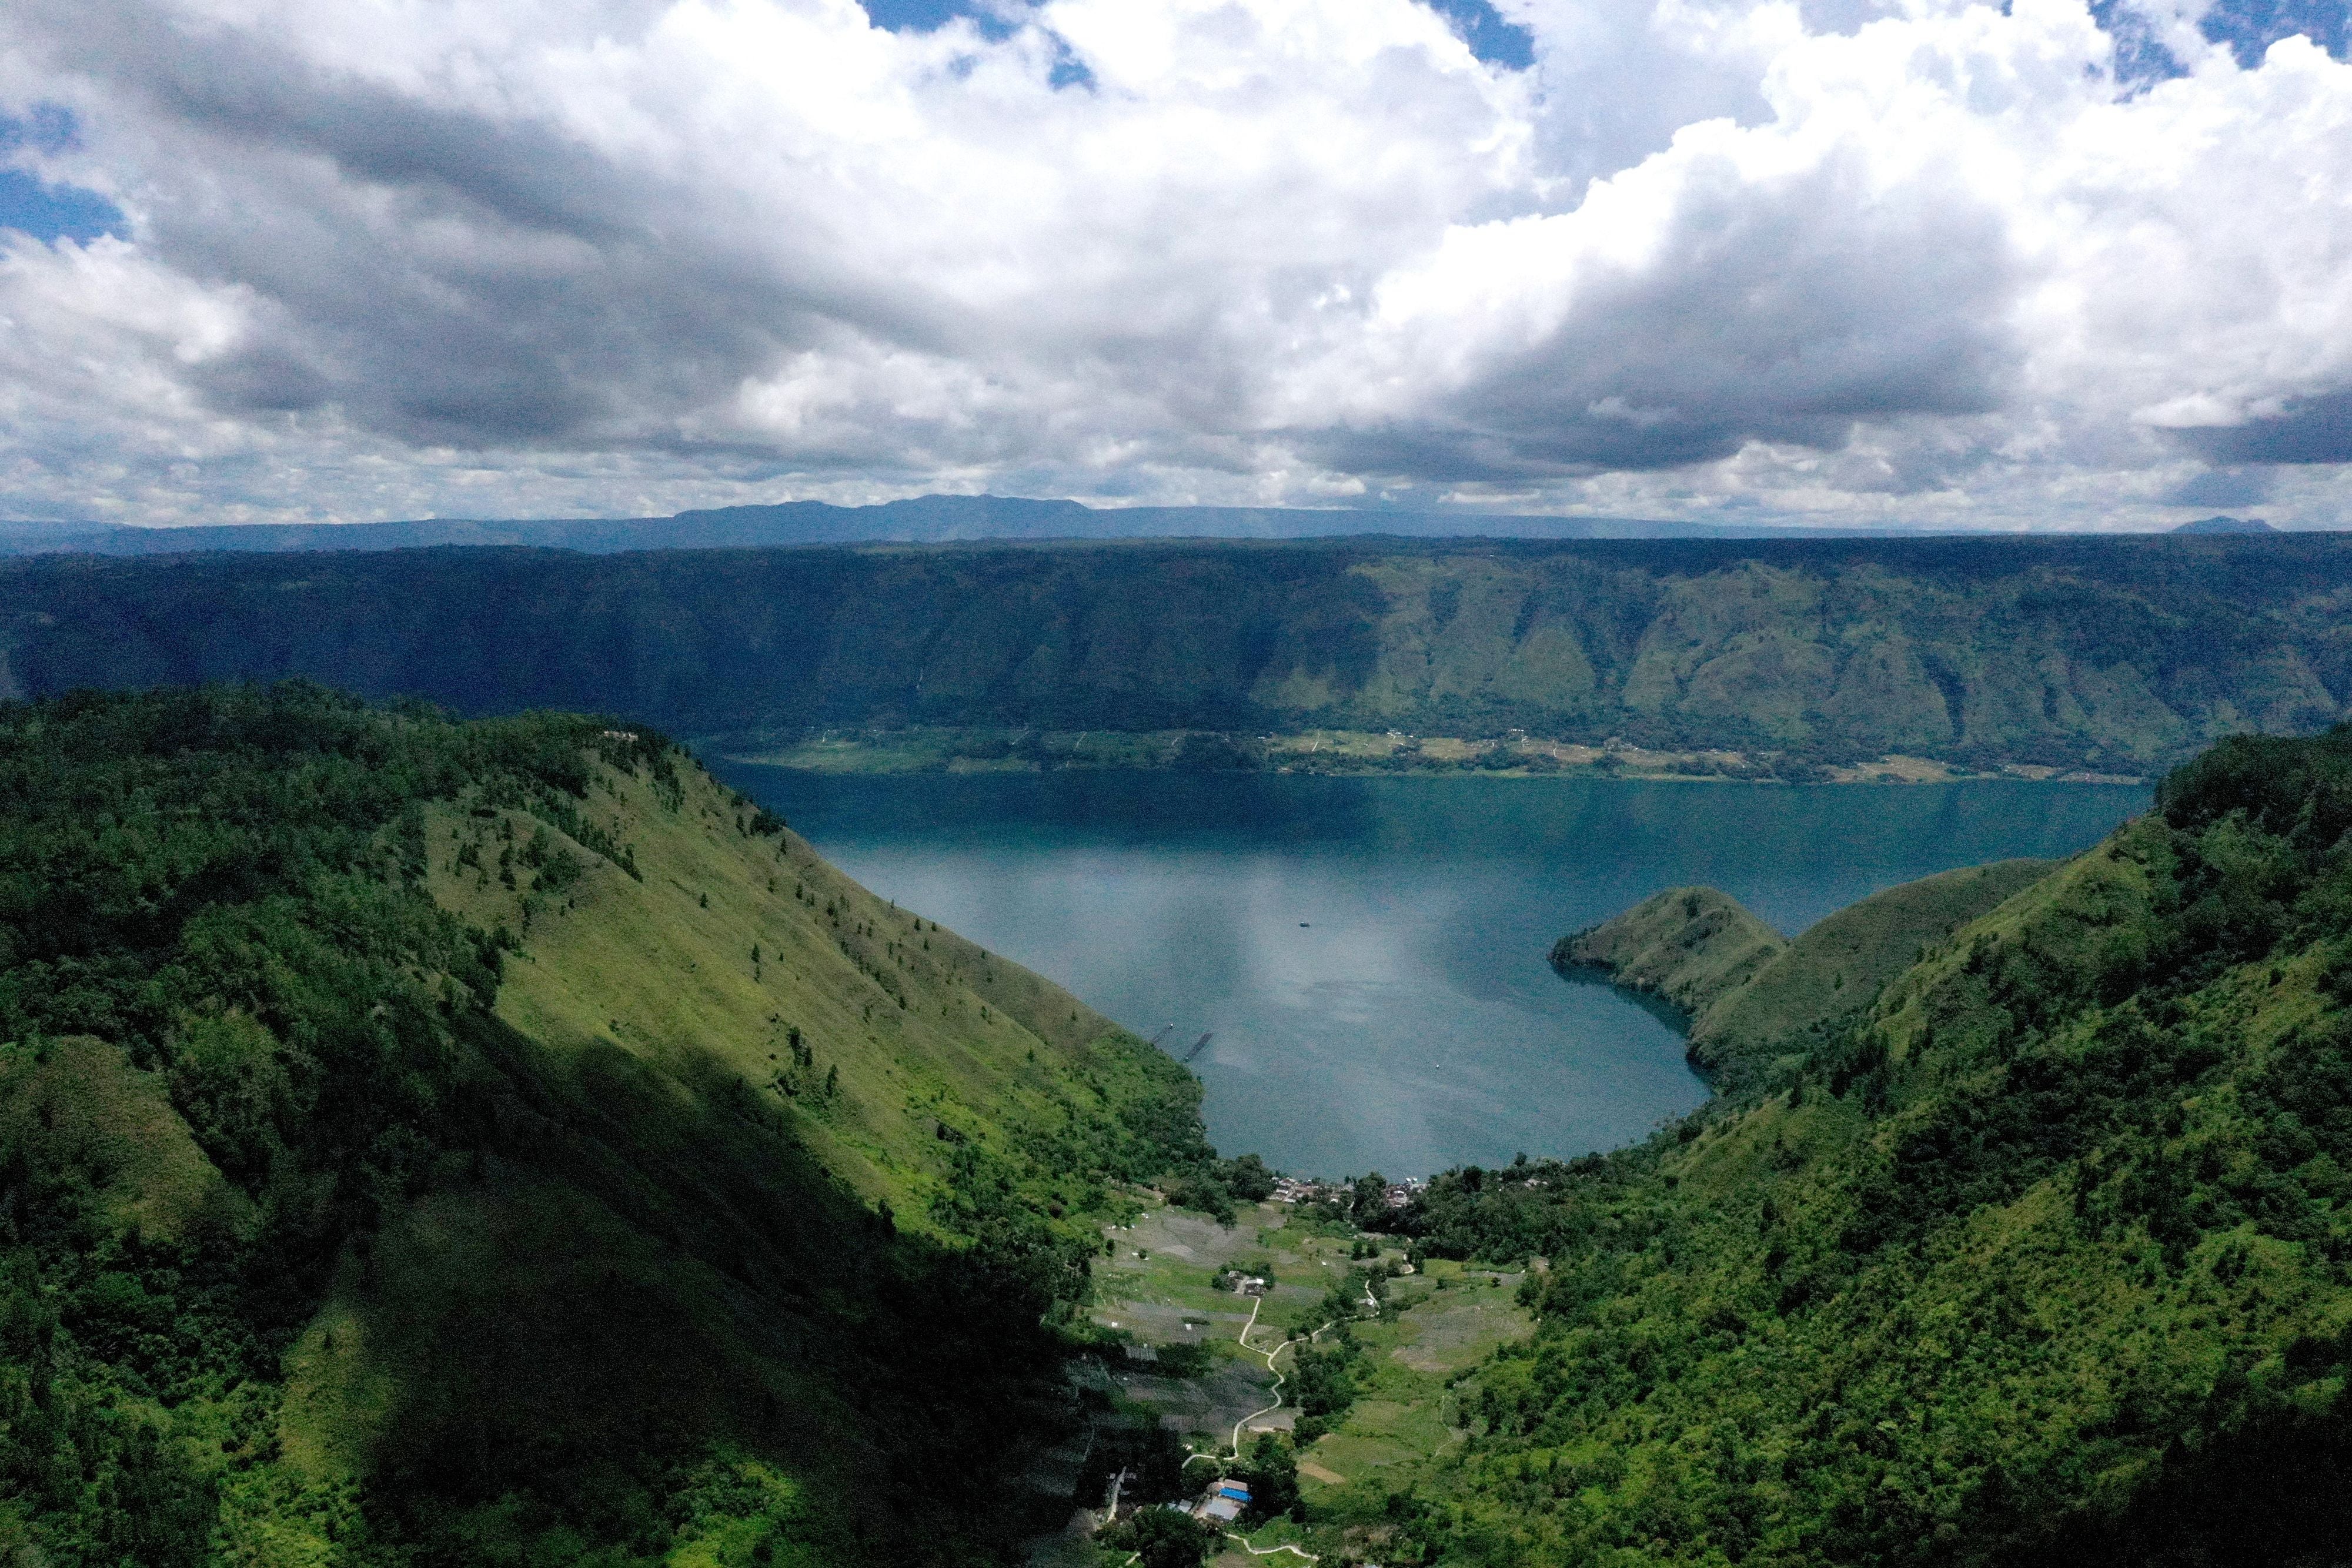 Indonesia’s Lake Toba was formed by a gigantic volcanic eruption some 70,000 years ago